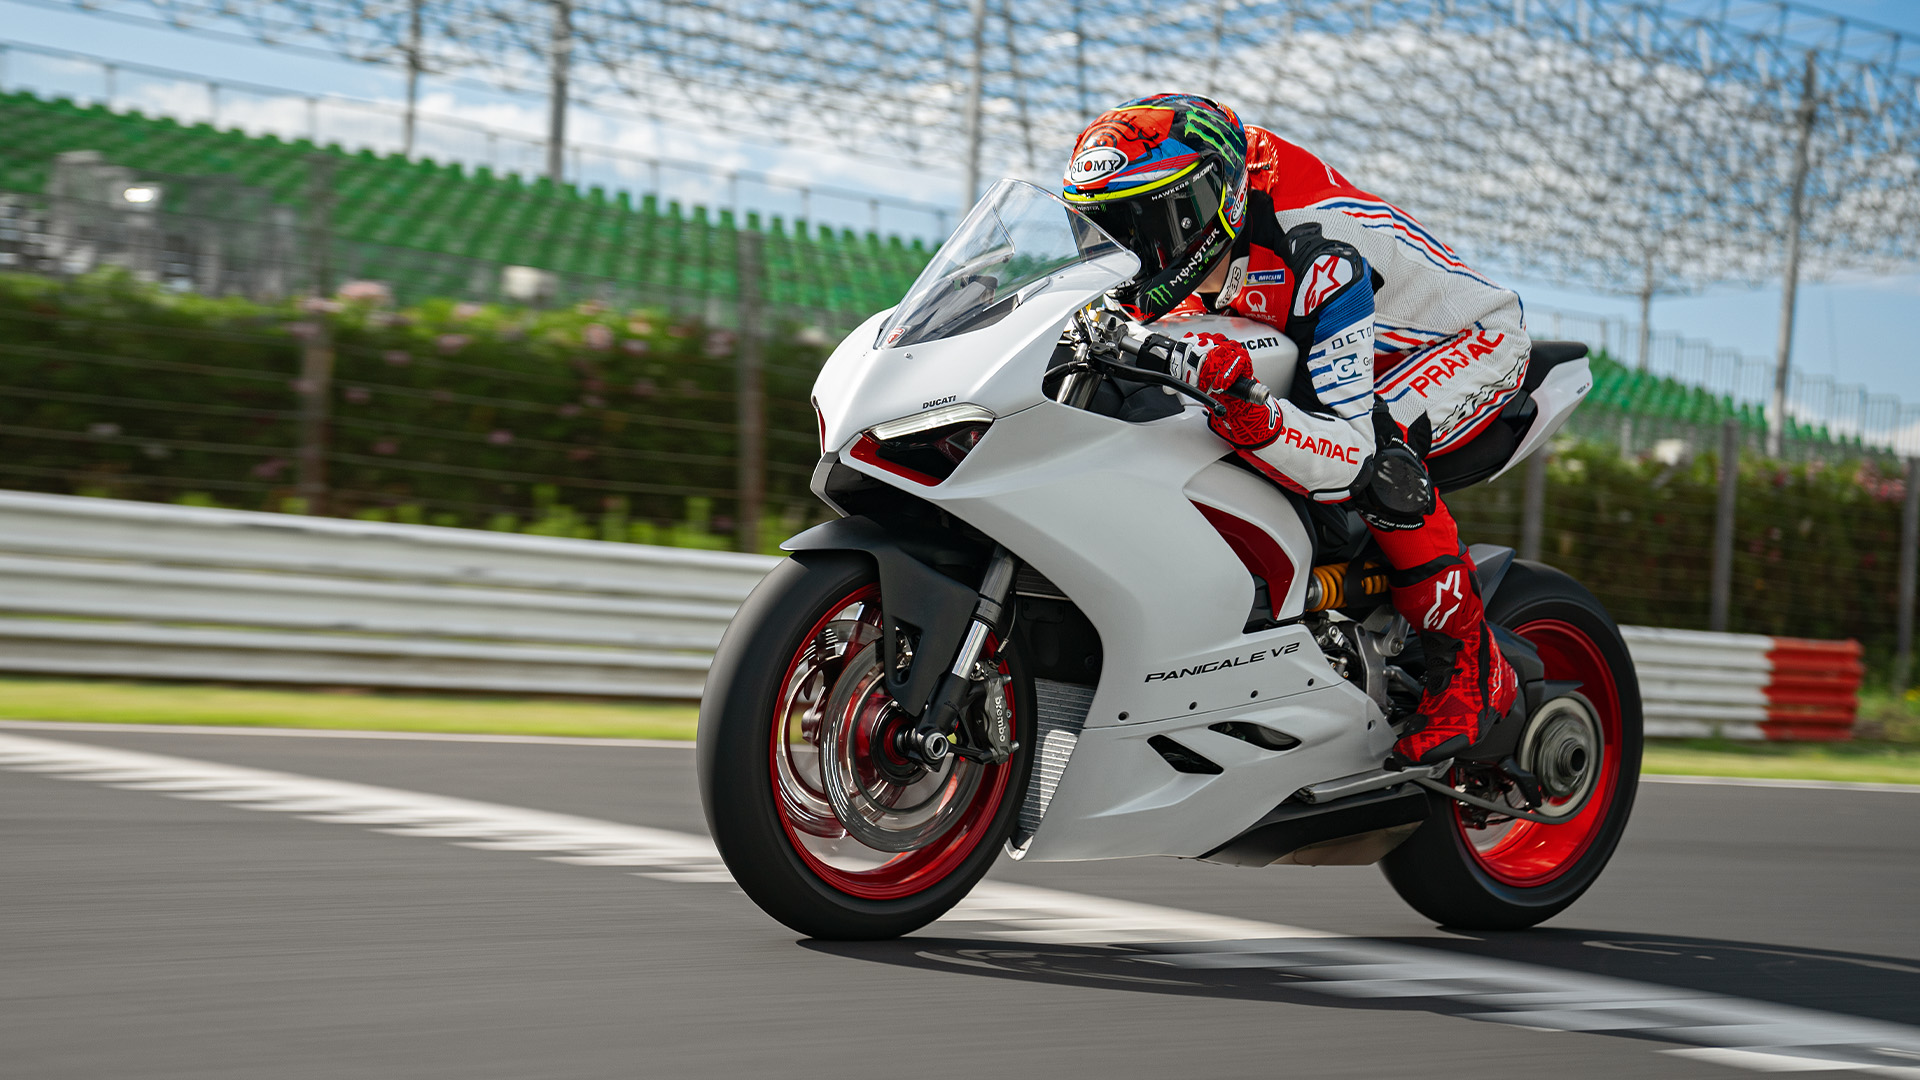 Panigale-V2-overview-gallery-04-1920x1080